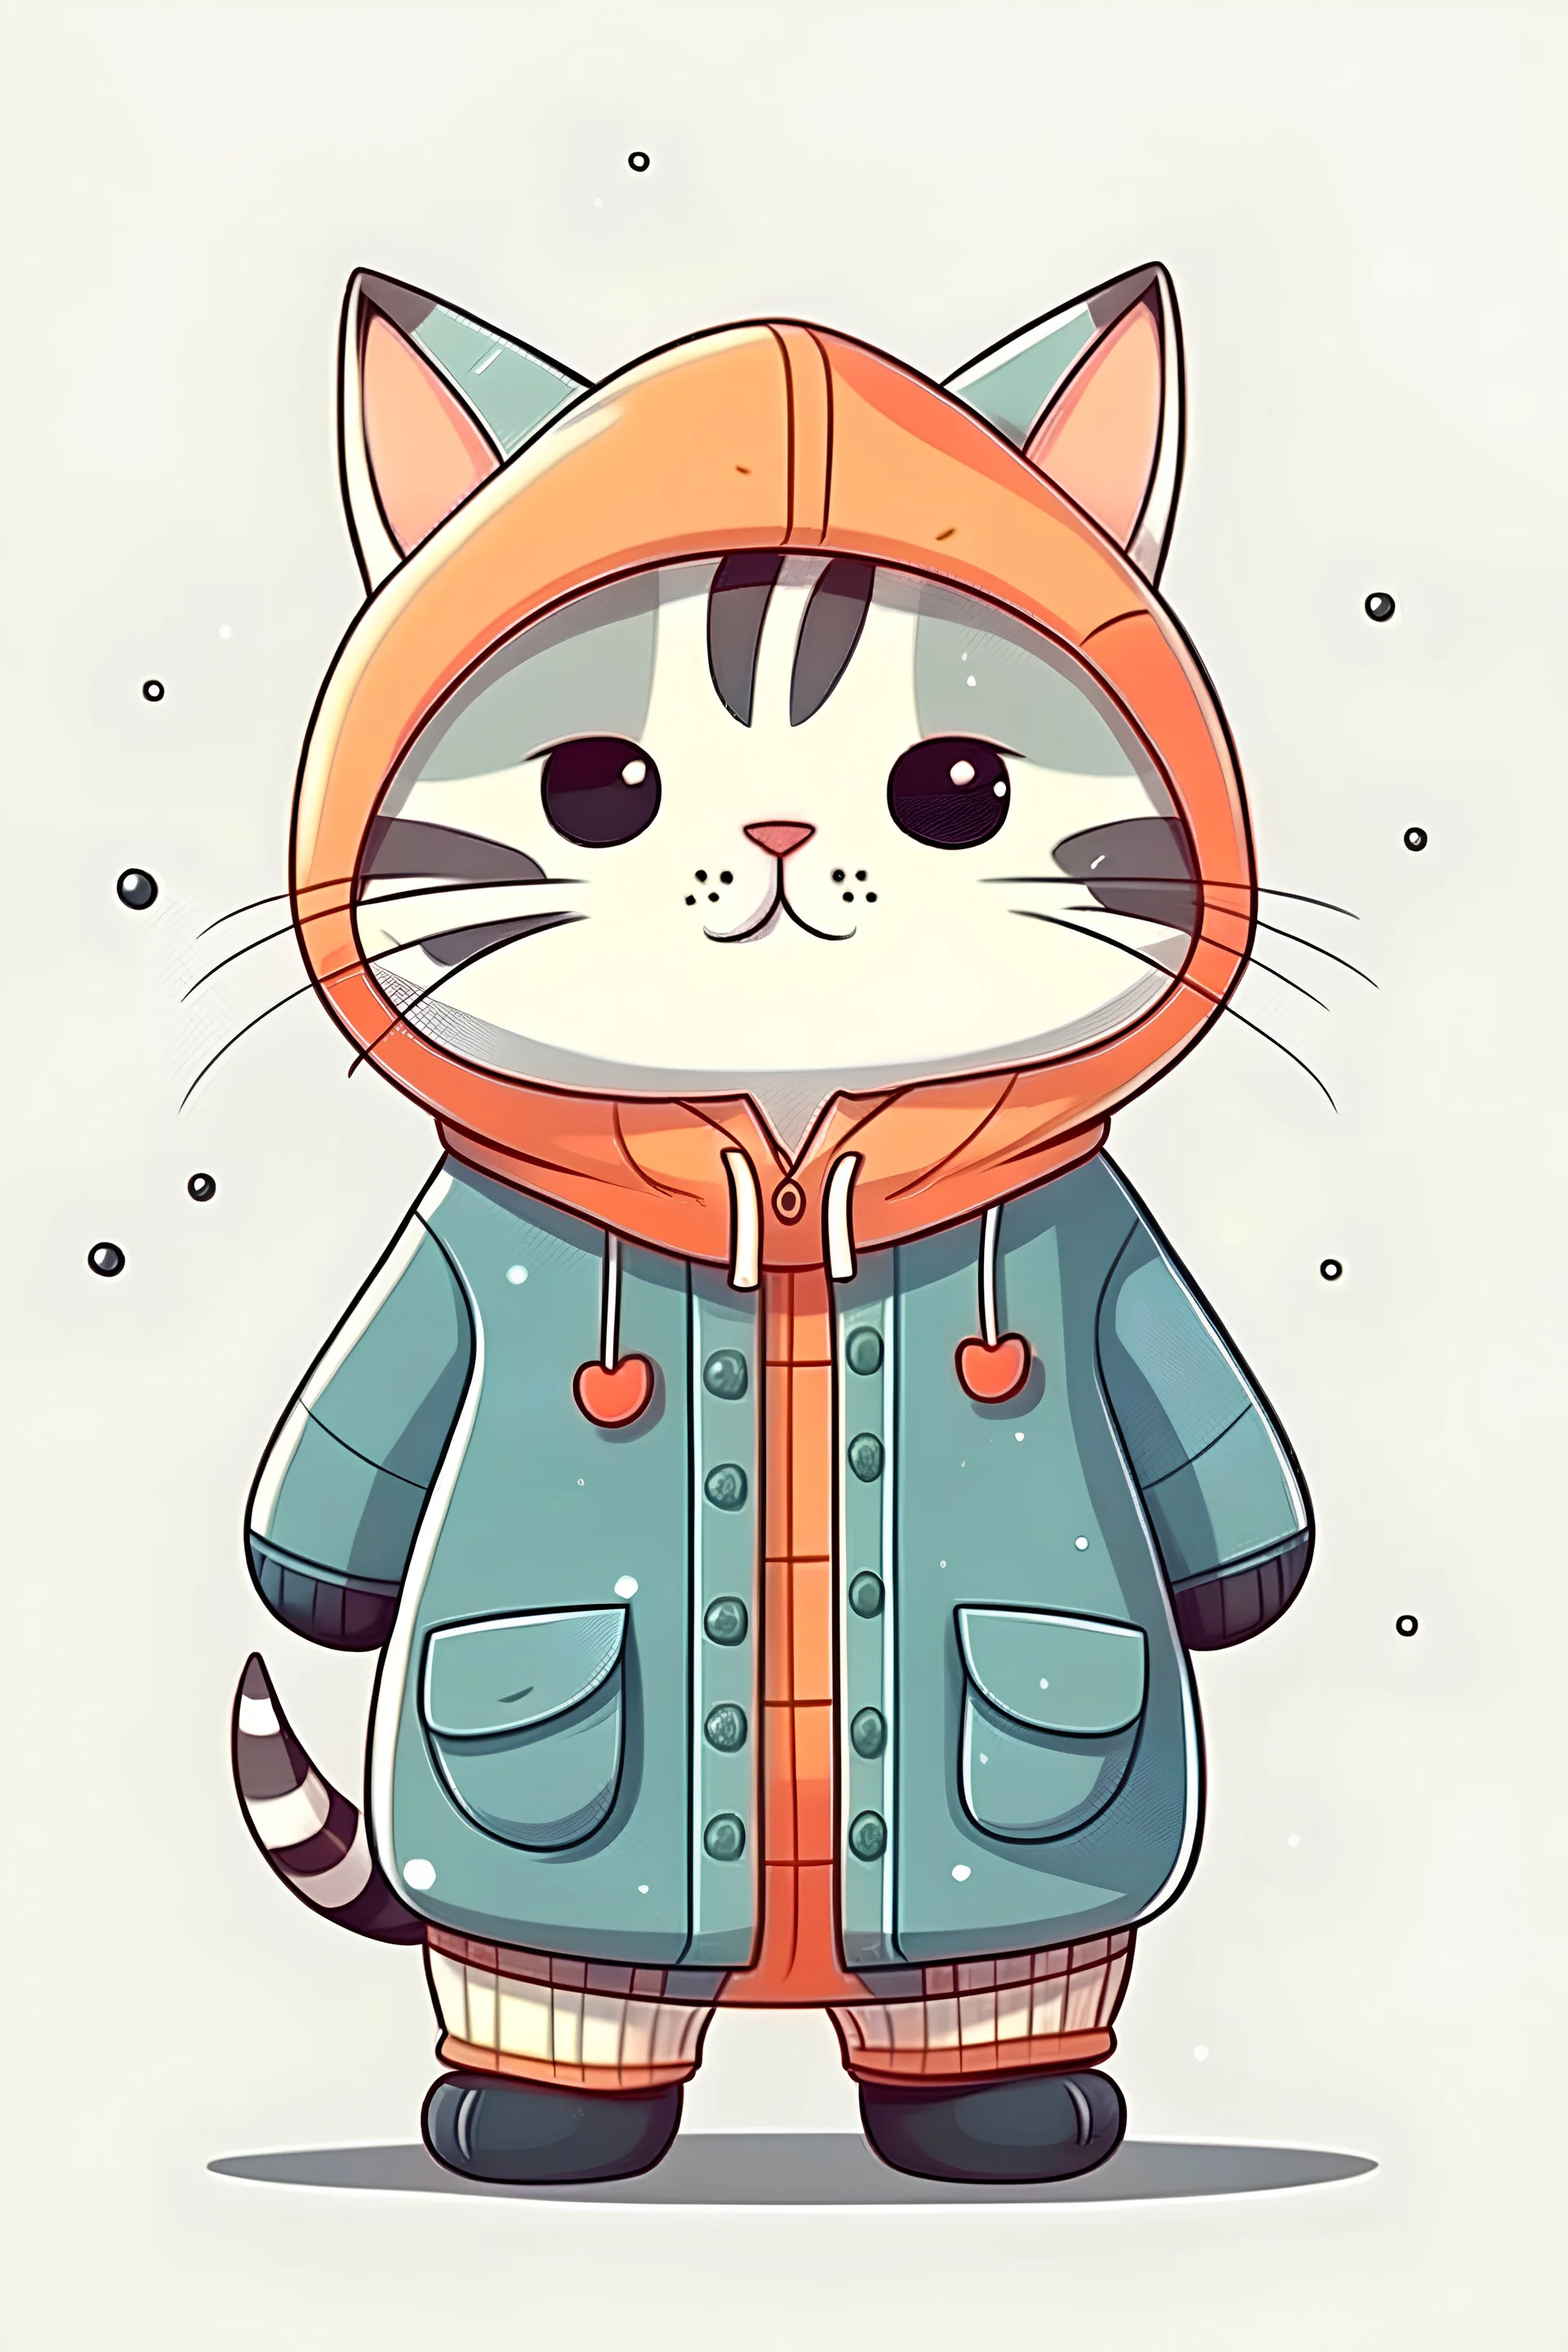 sweet illustration of a cute cat in a coat, in a cartoon style